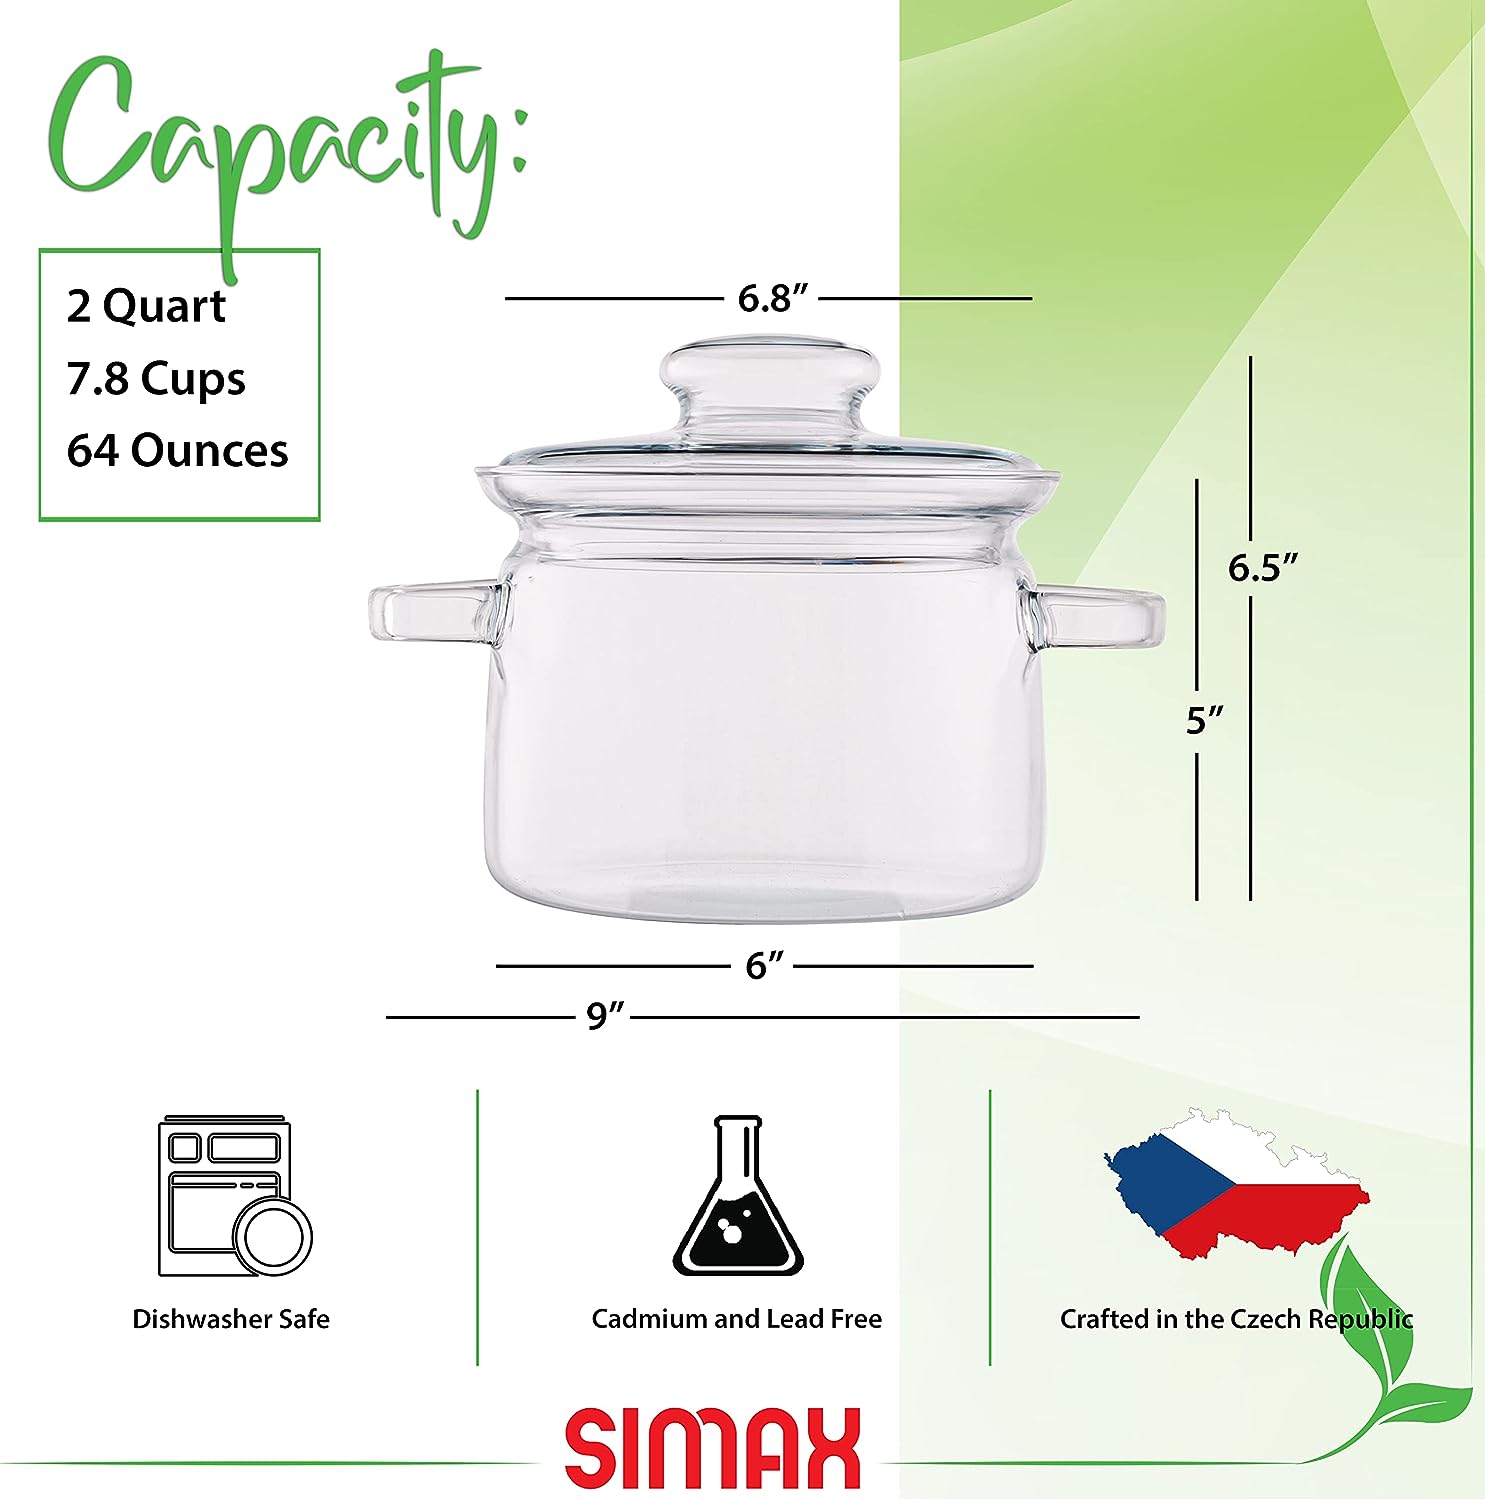 https://bigbigmart.com/wp-content/uploads/2023/11/Simax-Glass-Cookware-64-Oz-2-Quart-Clear-Glass-Pot-Glass-Saucepan-Potpourri-Simmer-Pot-With-Lid-Easy-Grip-Handles-Made-from-Oven-Microwave-Stove-and-Dishwasher-Safe-Borosilicate-Glass1.jpg